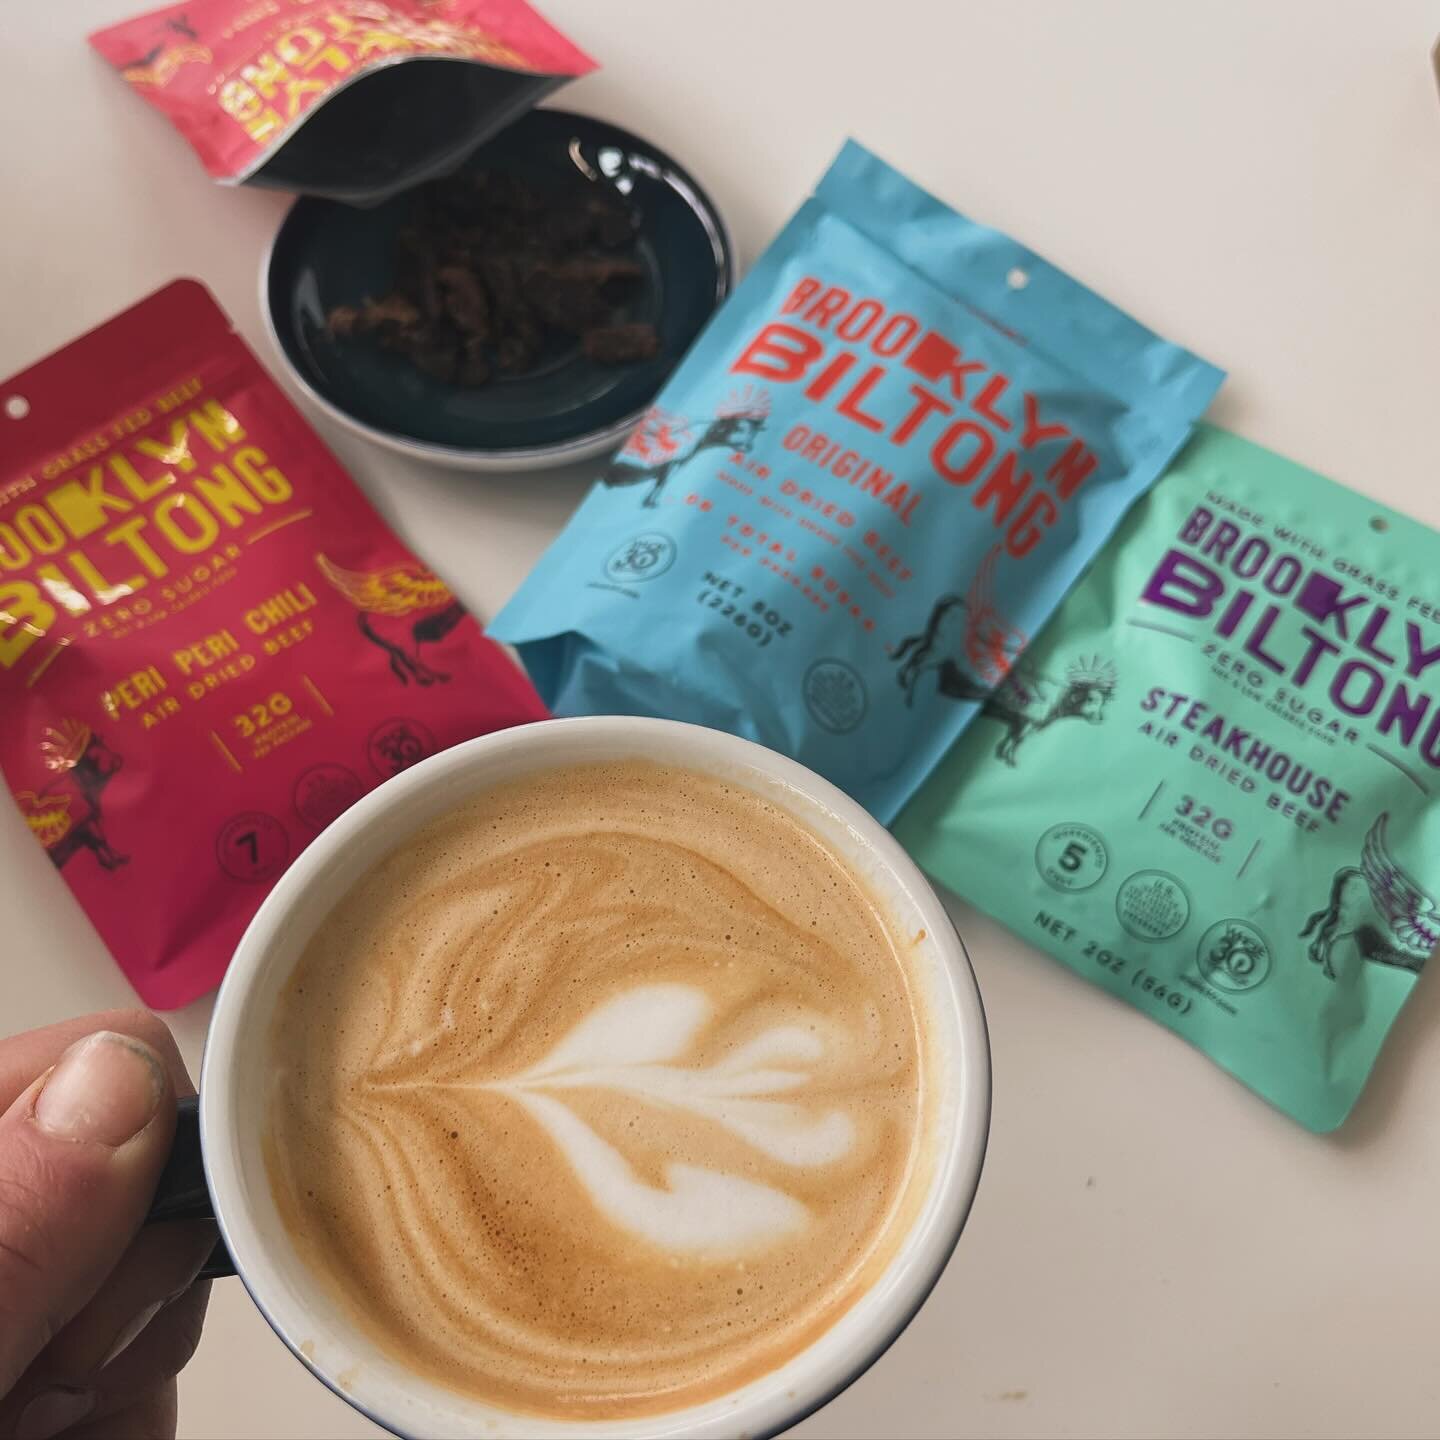 For the sexy carnivore in your life 🦖
.
@brooklynbiltong = 100% grass-fed with 32g of protein in a 2 oz pack &amp; only ingredients you can pronounce &hearts;️